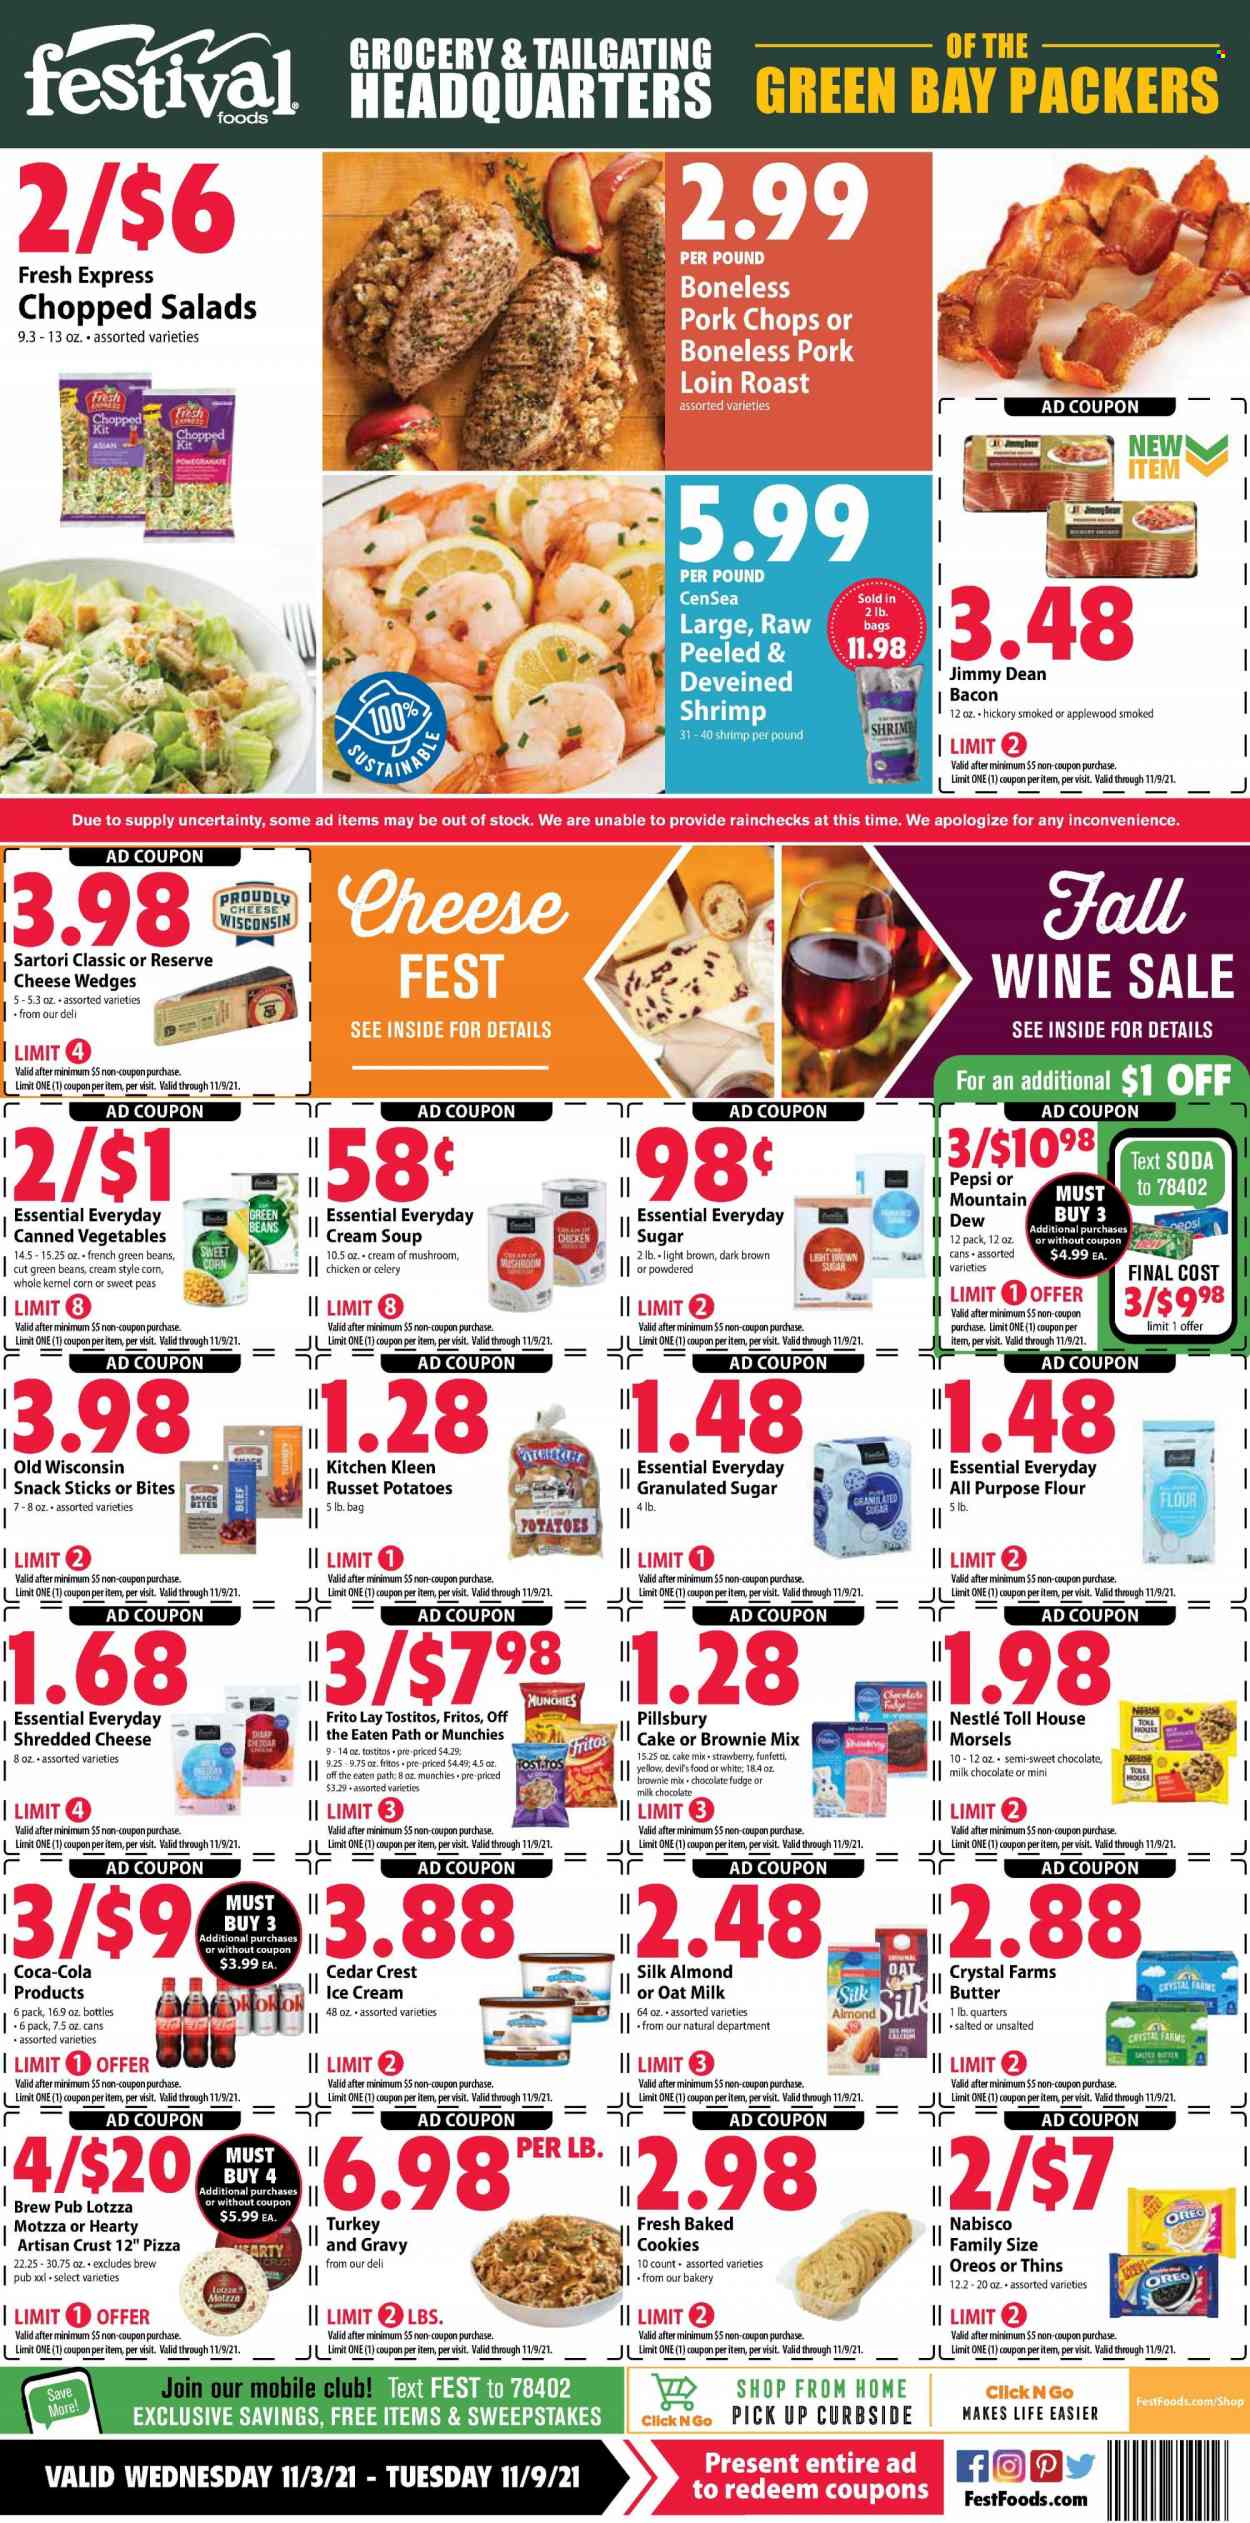 thumbnail - Festival Foods Flyer - 11/03/2021 - 11/09/2021 - Sales products - brownie mix, cake mix, green beans, russet potatoes, potatoes, peas, sweet corn, chopped salad, shrimps, pizza, soup, Pillsbury, Jimmy Dean, bacon, shredded cheese, Oreo, oat milk, butter, ice cream, cookies, fudge, milk chocolate, Nestlé, snack, Fritos, Thins, Tostitos, all purpose flour, cane sugar, flour, granulated sugar, canned vegetables, Pepsi, soda, wine, pork chops, pork loin, pork meat, Crest. Page 1.